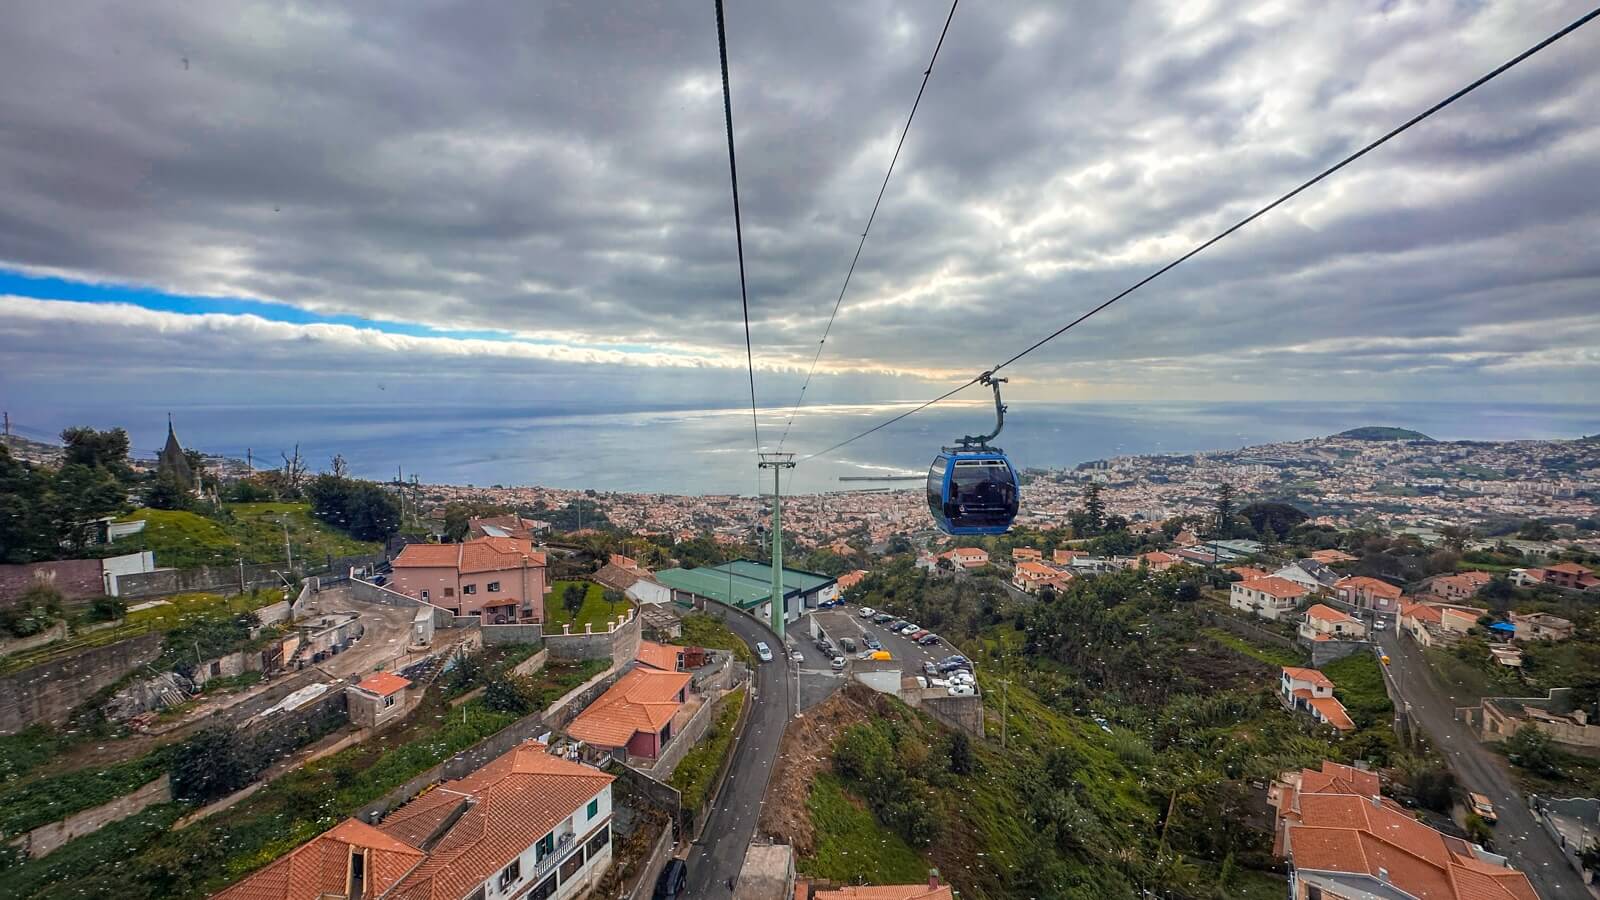 The True Flavours & Natural Beauty of Madeira Islands - Cable Car in Funchal